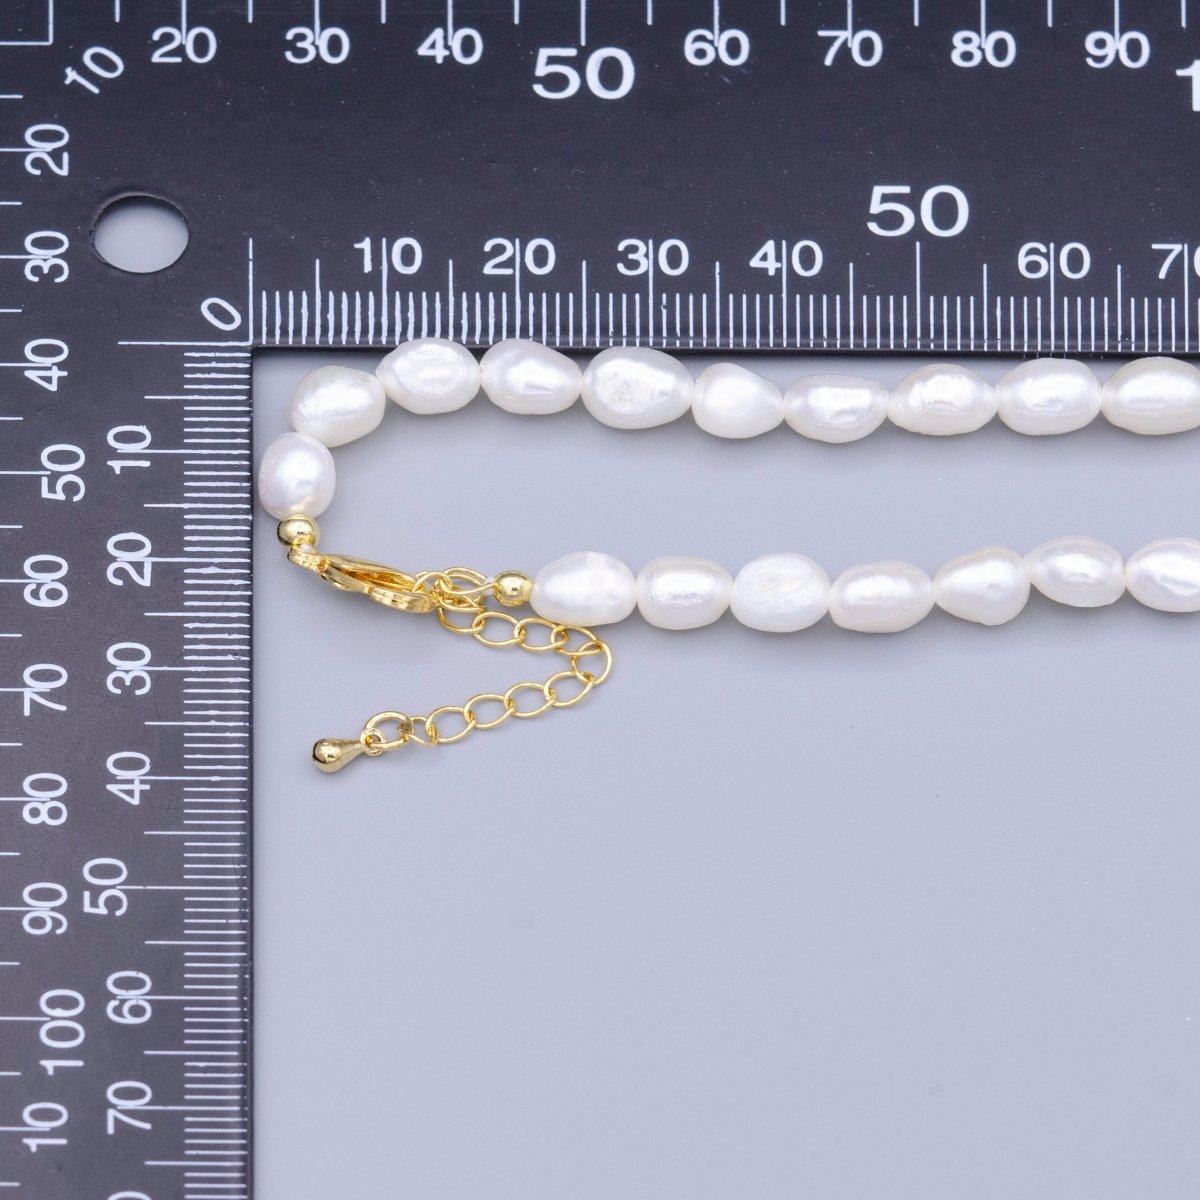 OS 6.4mm White Nugget Freshwater Pearl 14.7 Inch Choker Necklace | WA-1494 Clearance Pricing - DLUXCA